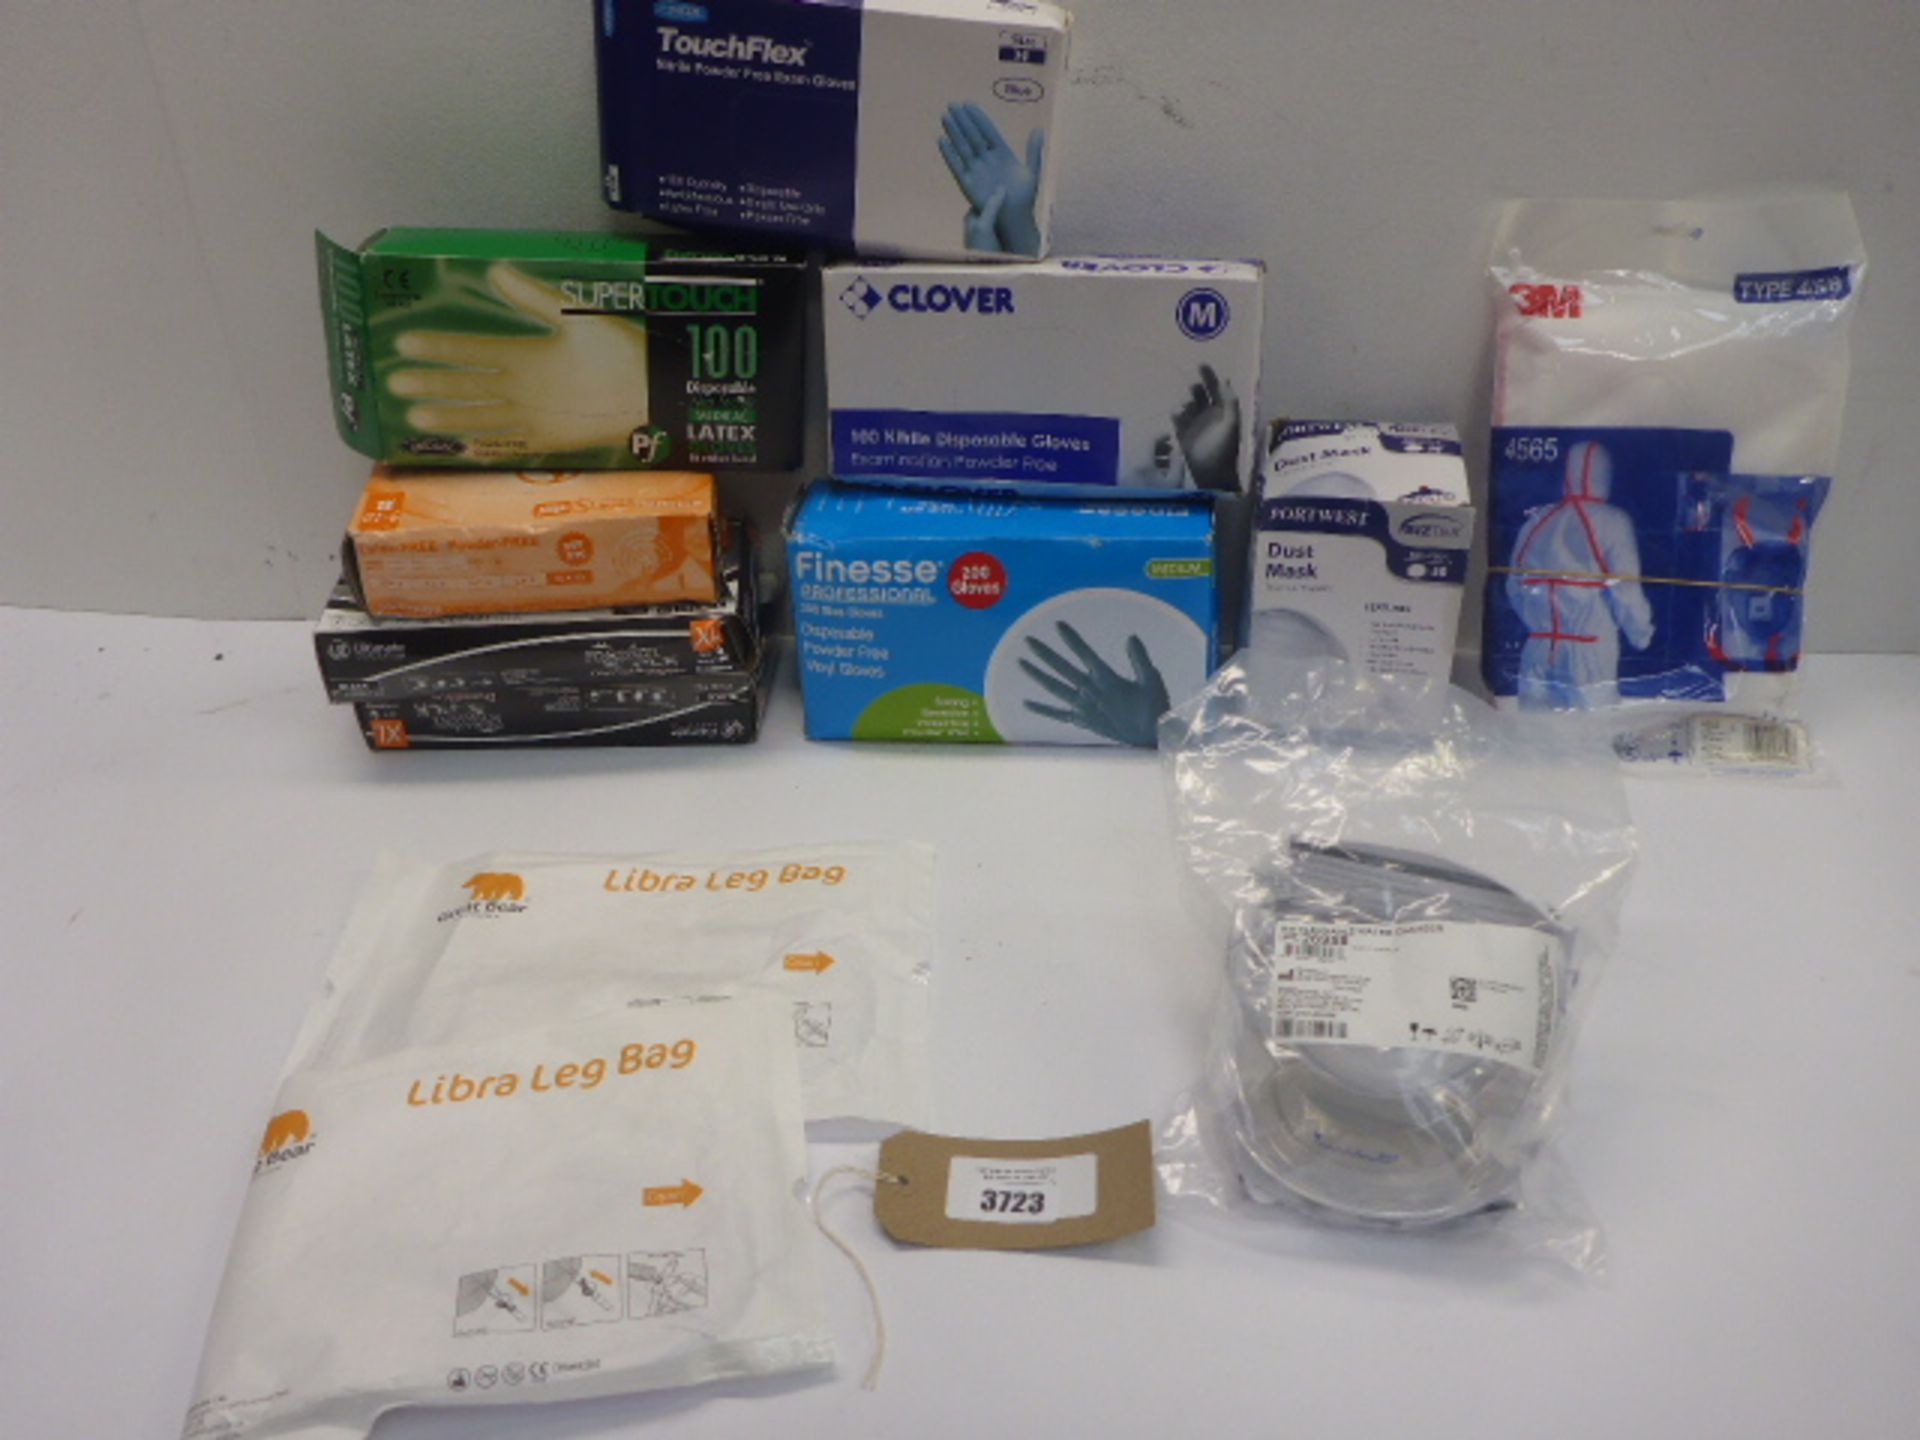 7 packs disposable examination gloves, cleanable water chamber, Libra leg bags, dust mask and 3M